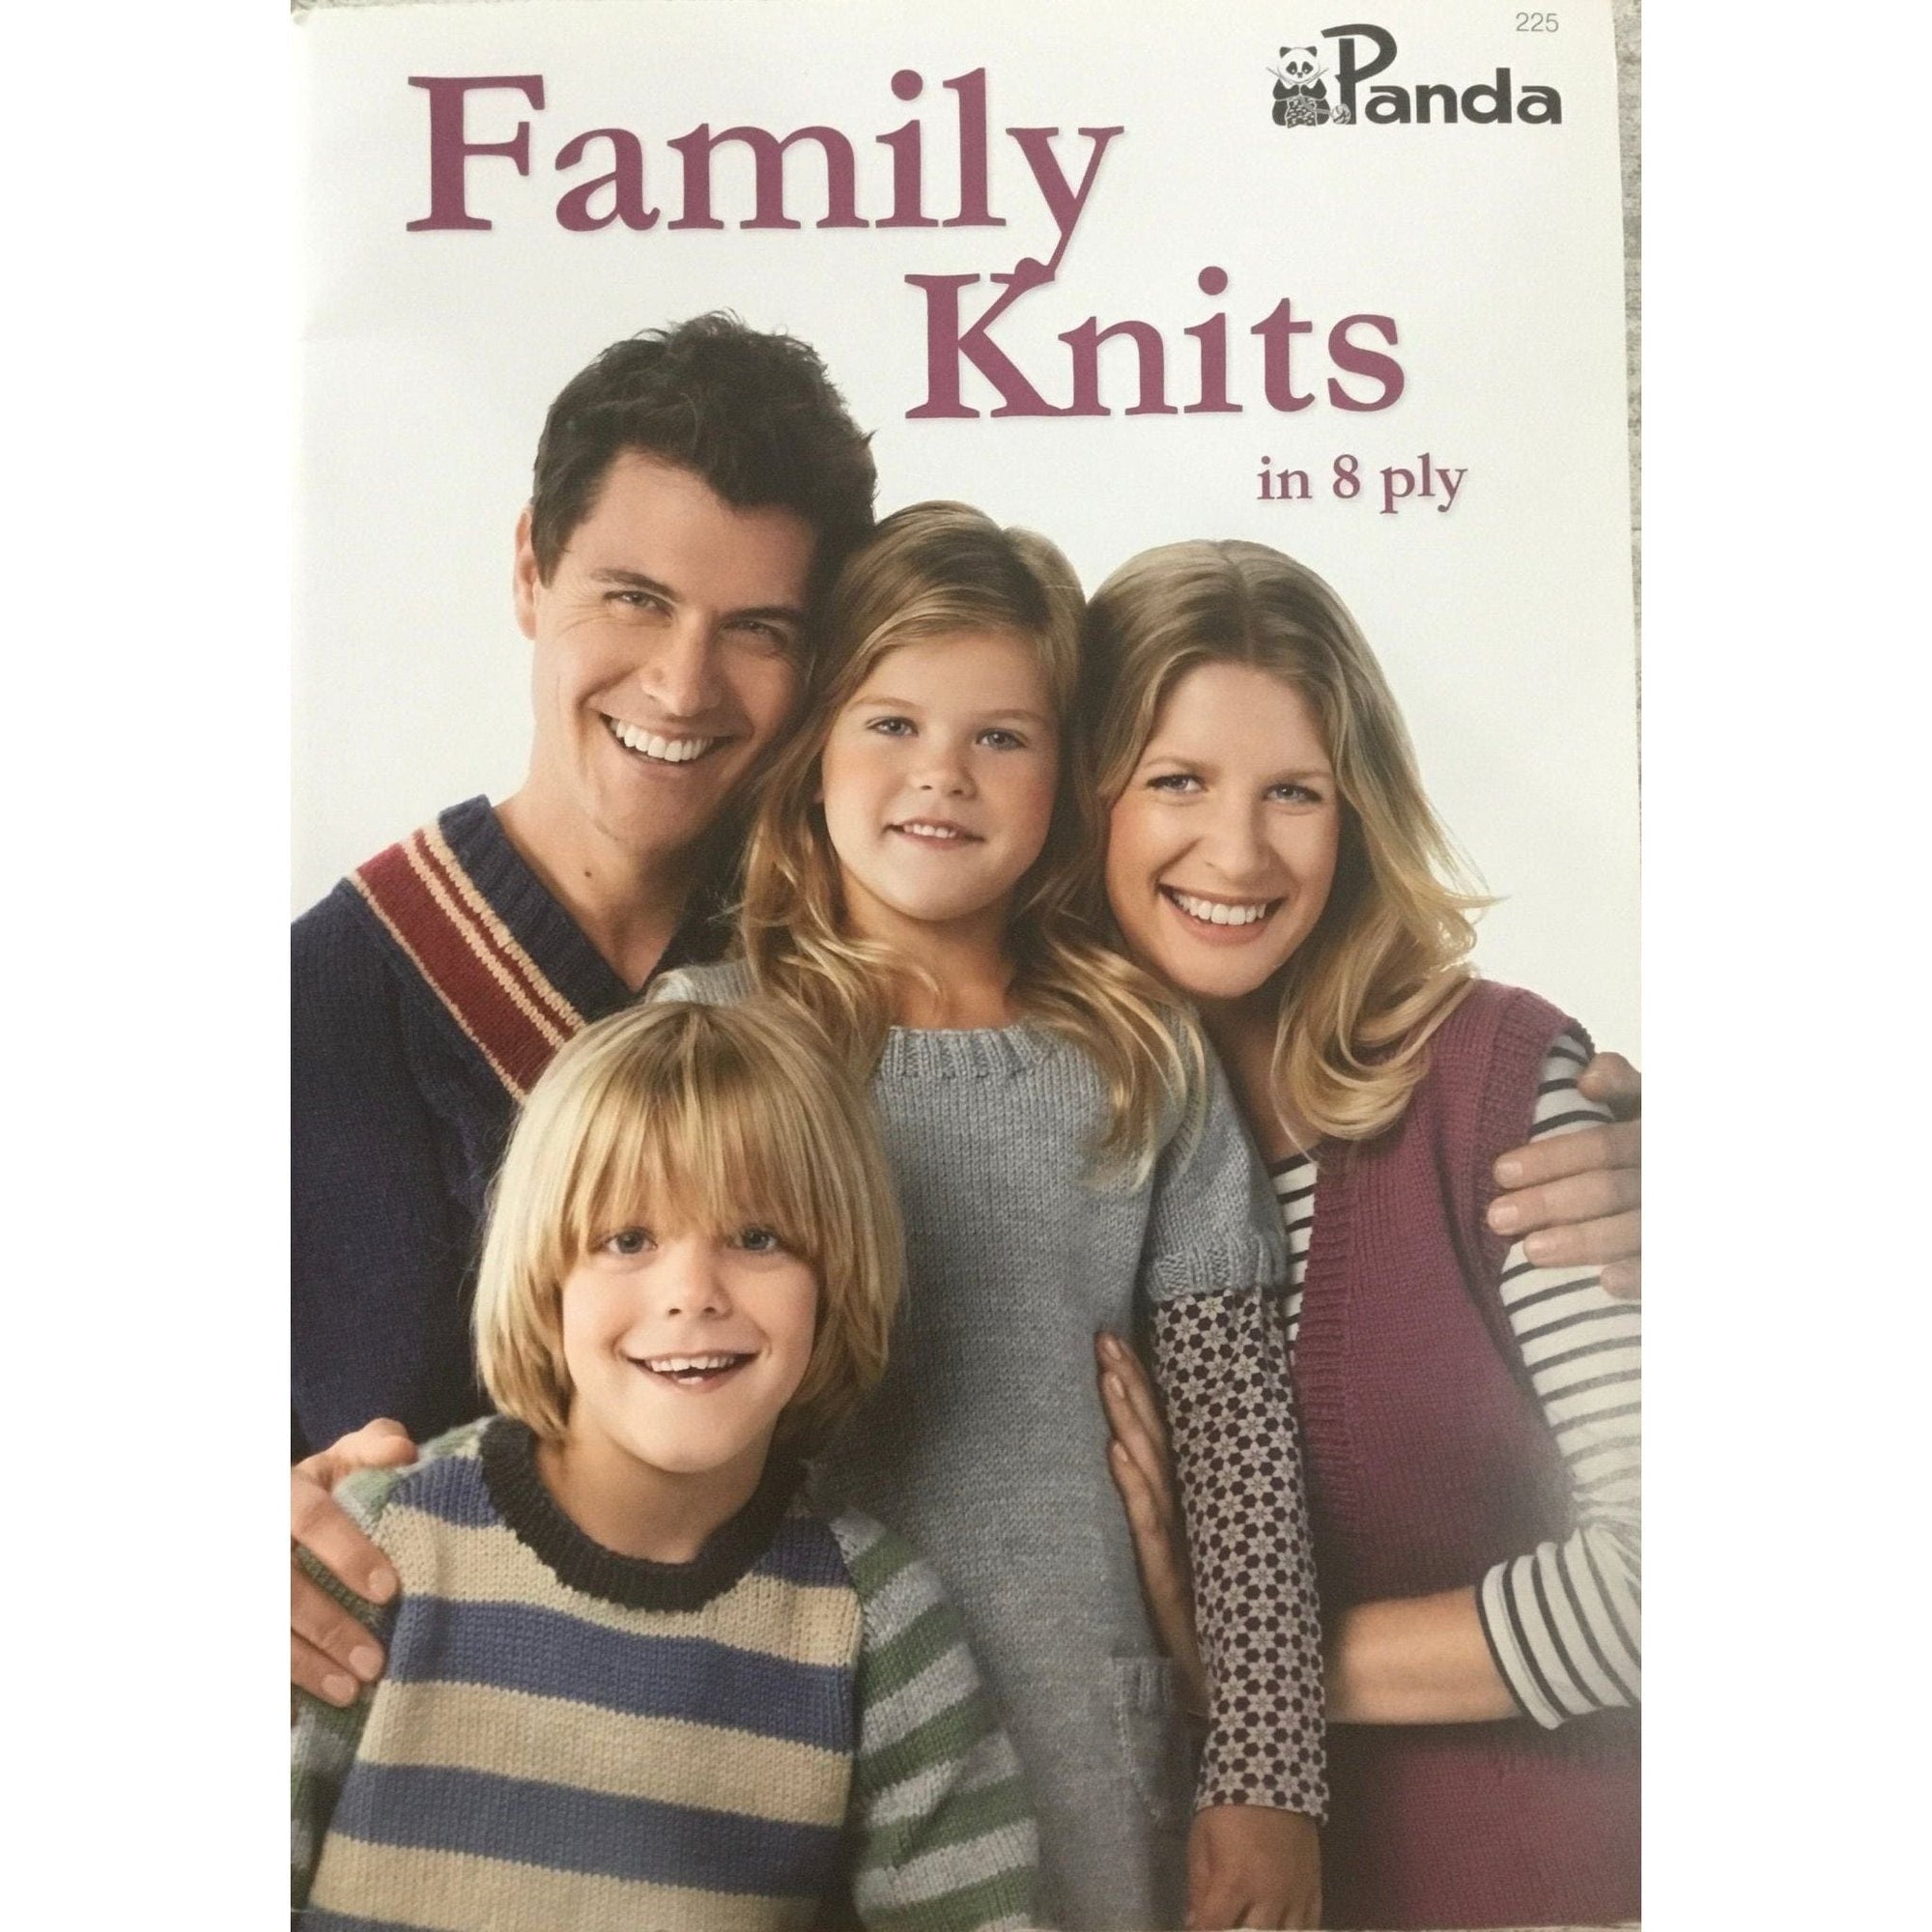 Family Knits in 8 Ply - 18 projects